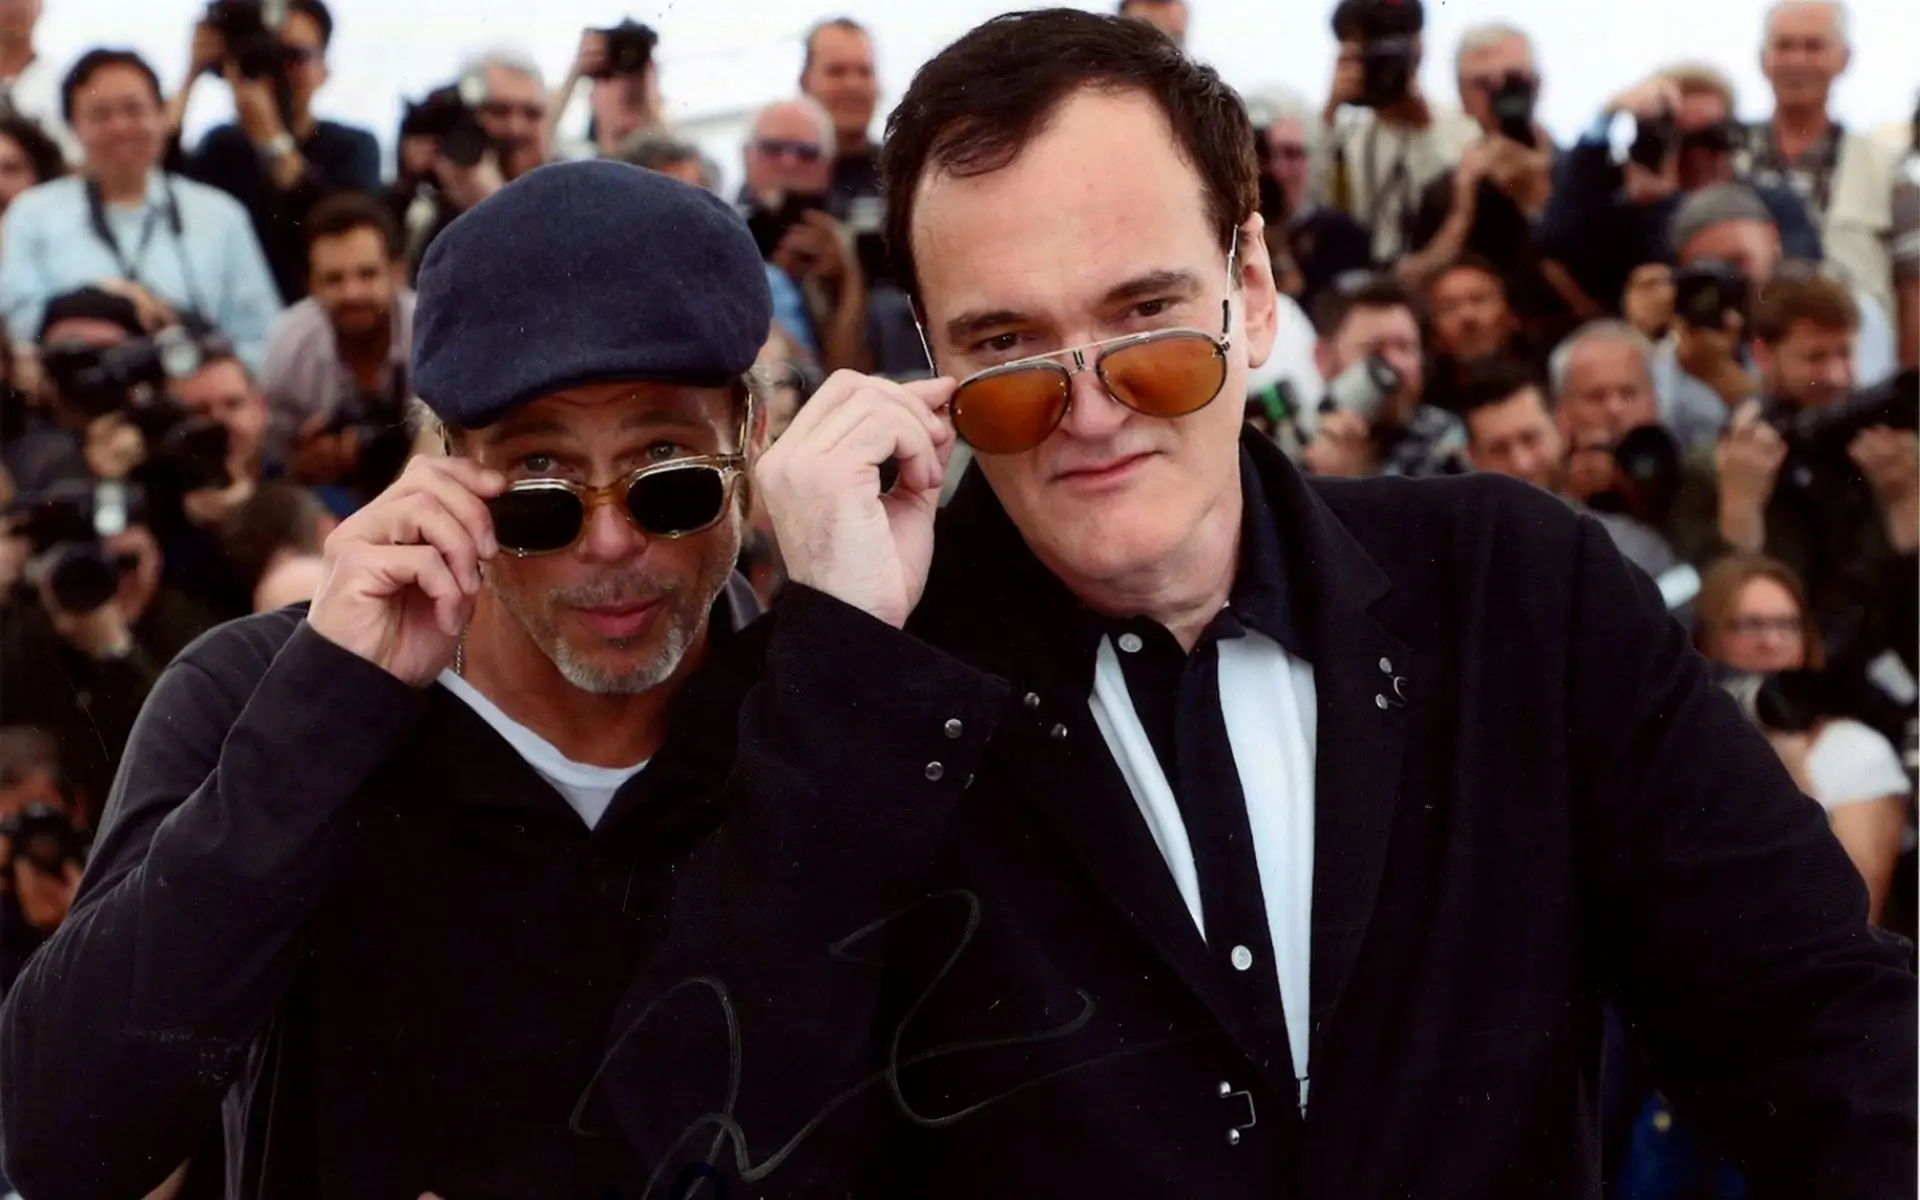 Quentin Tarantino will reunite with Brad Pitt for final project “The Movie Critic”